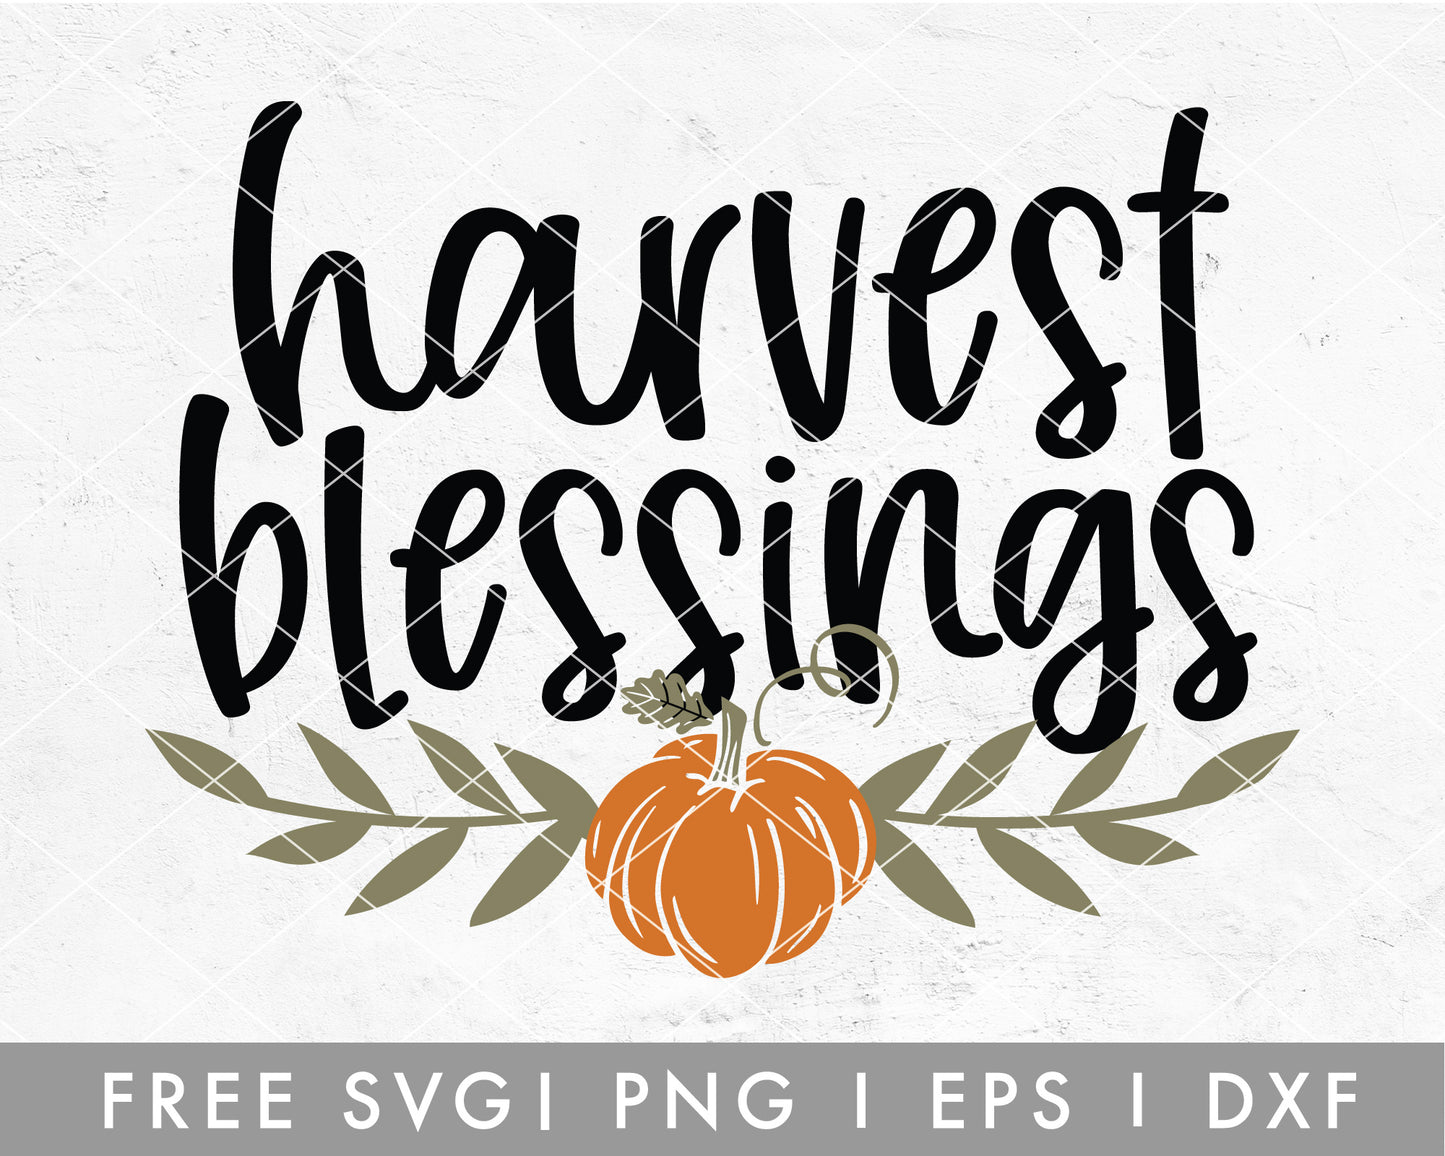 FREE Harvest Blessings SVG Cut File for Cricut, Cameo Silhouette | Fall Thanksgiving SVG Cut File